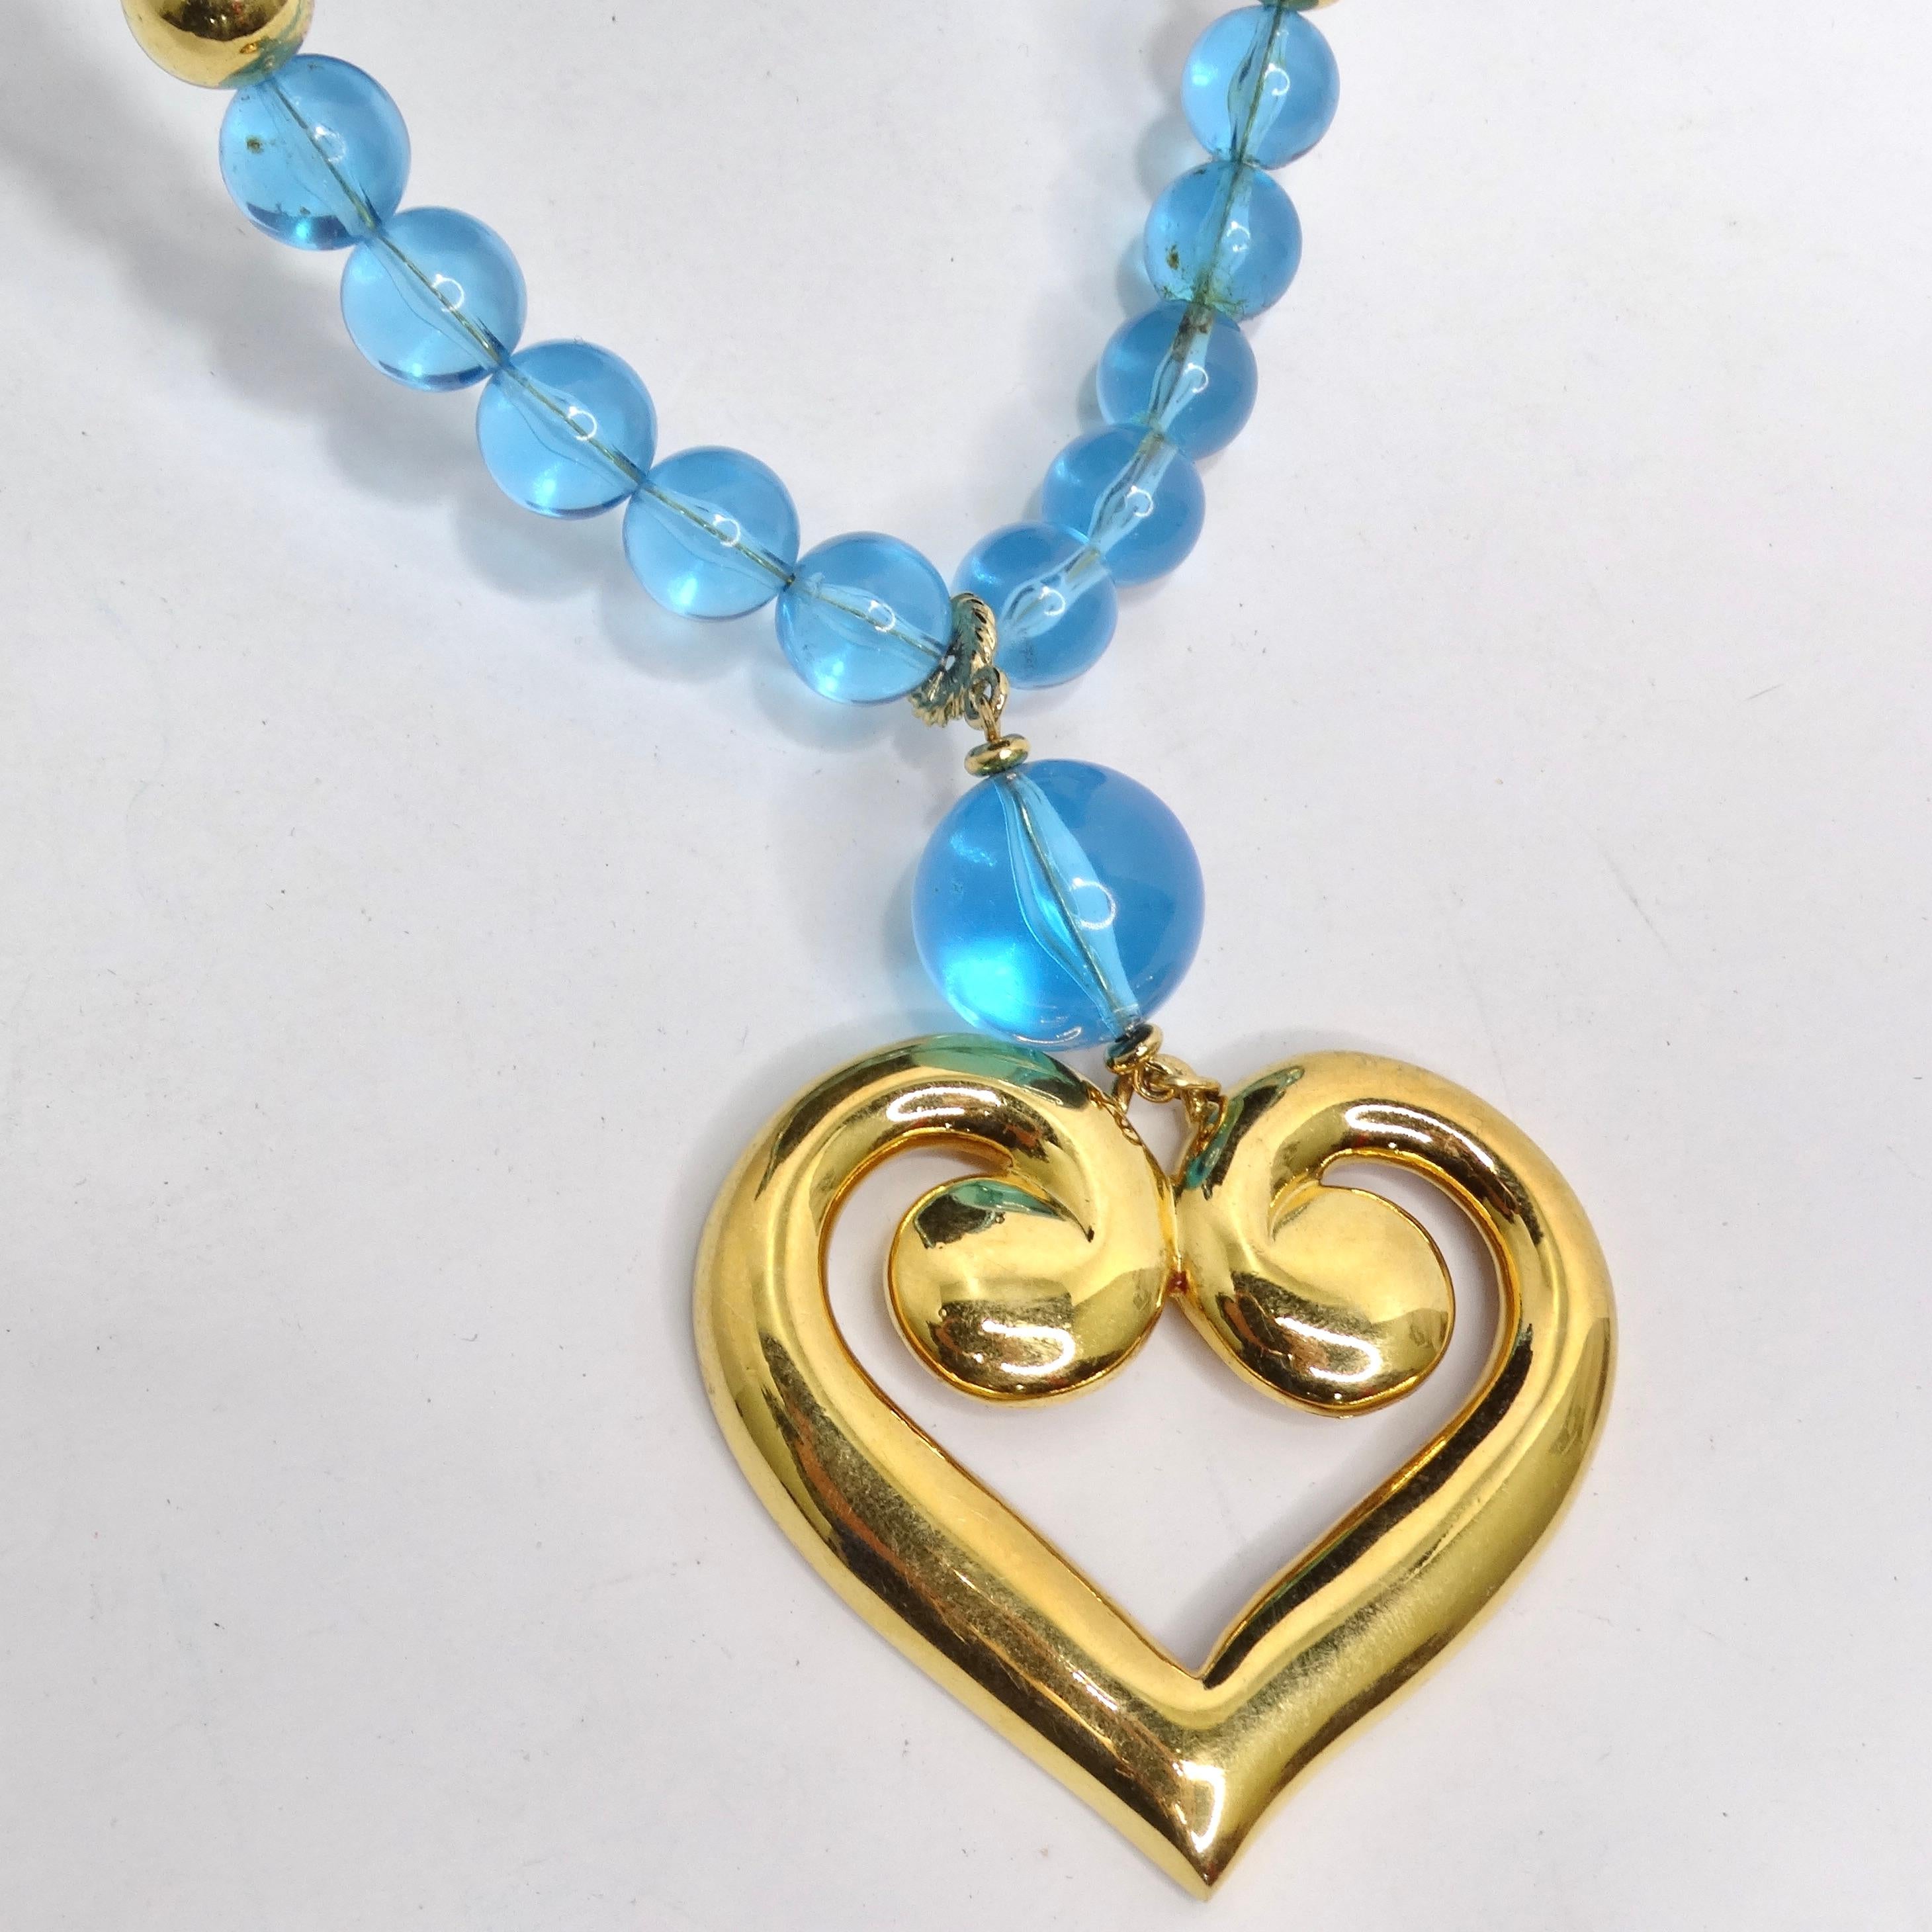 Napier 18K Gold Plated Greek Heart Blue Bead Pendant Necklace In Excellent Condition For Sale In Scottsdale, AZ